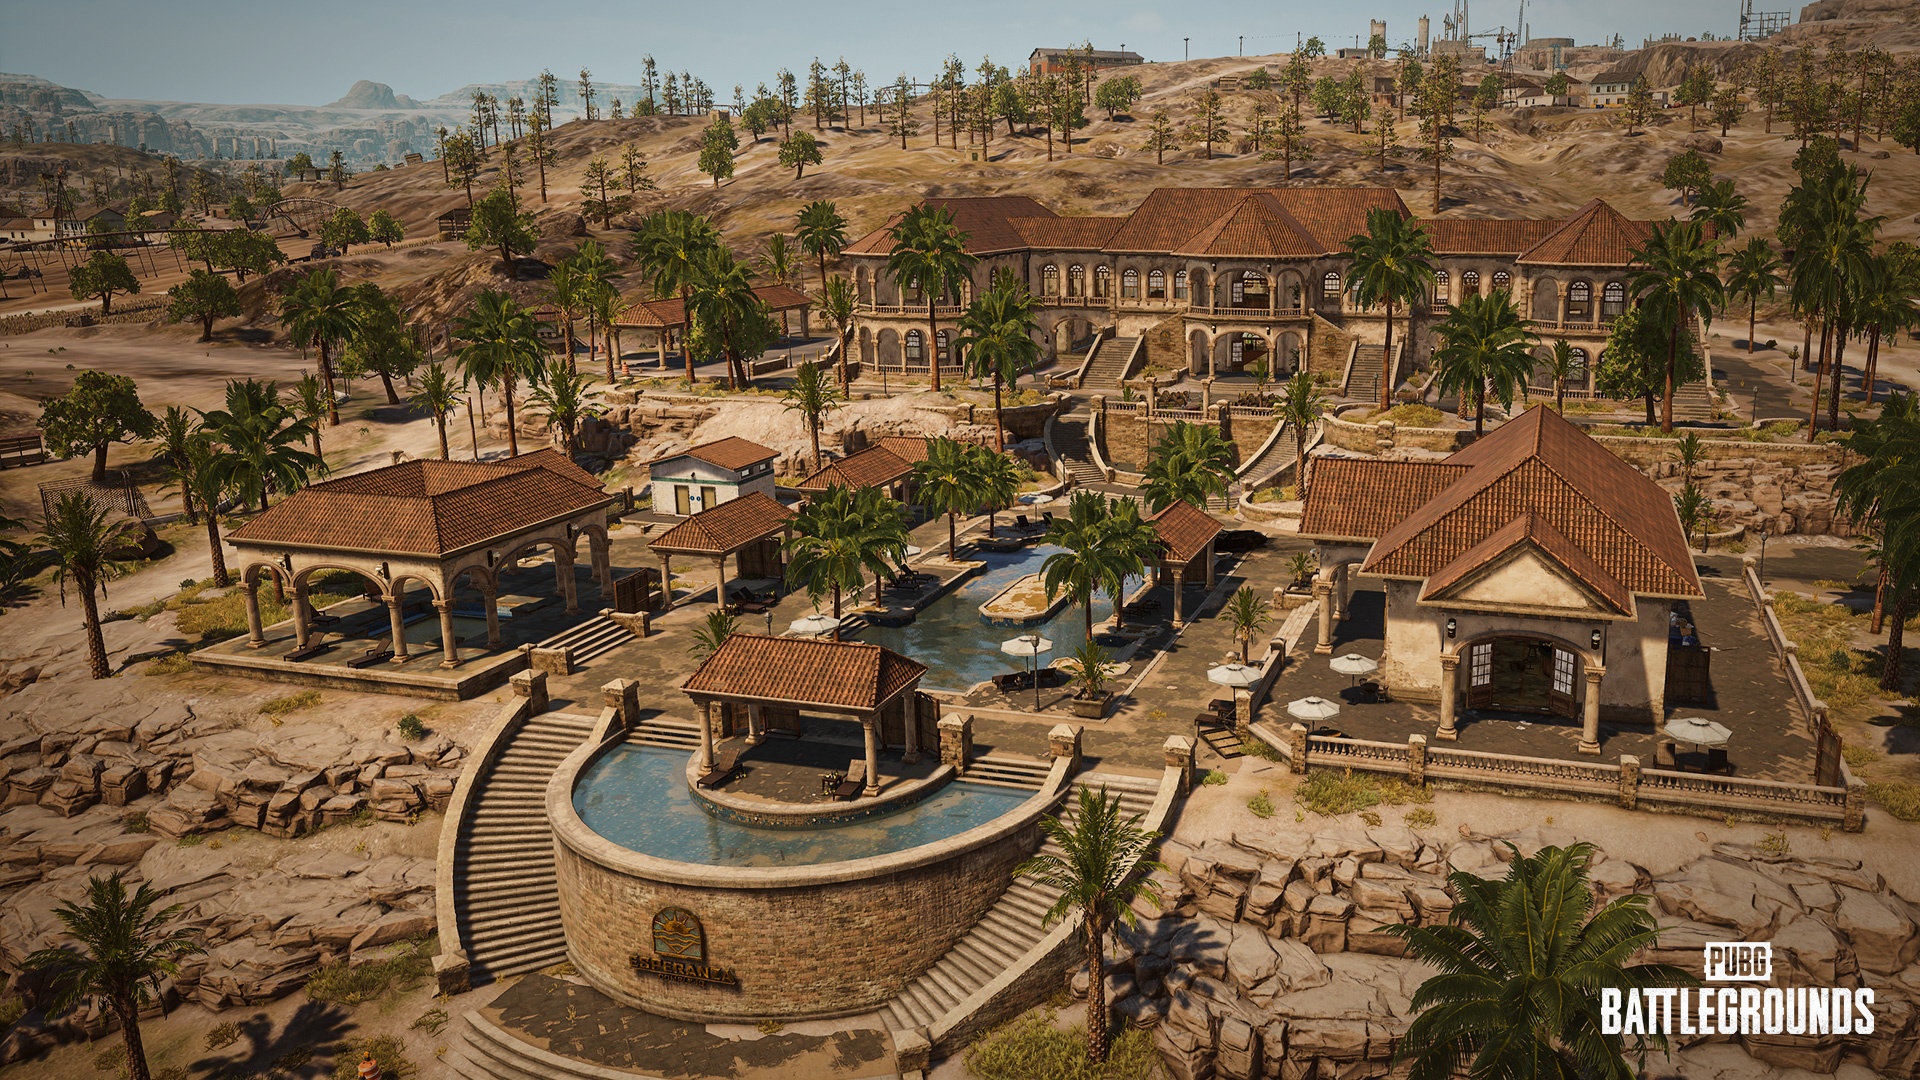 PUBG Resort on Miramar, a cozy mention with pools in a dry area.